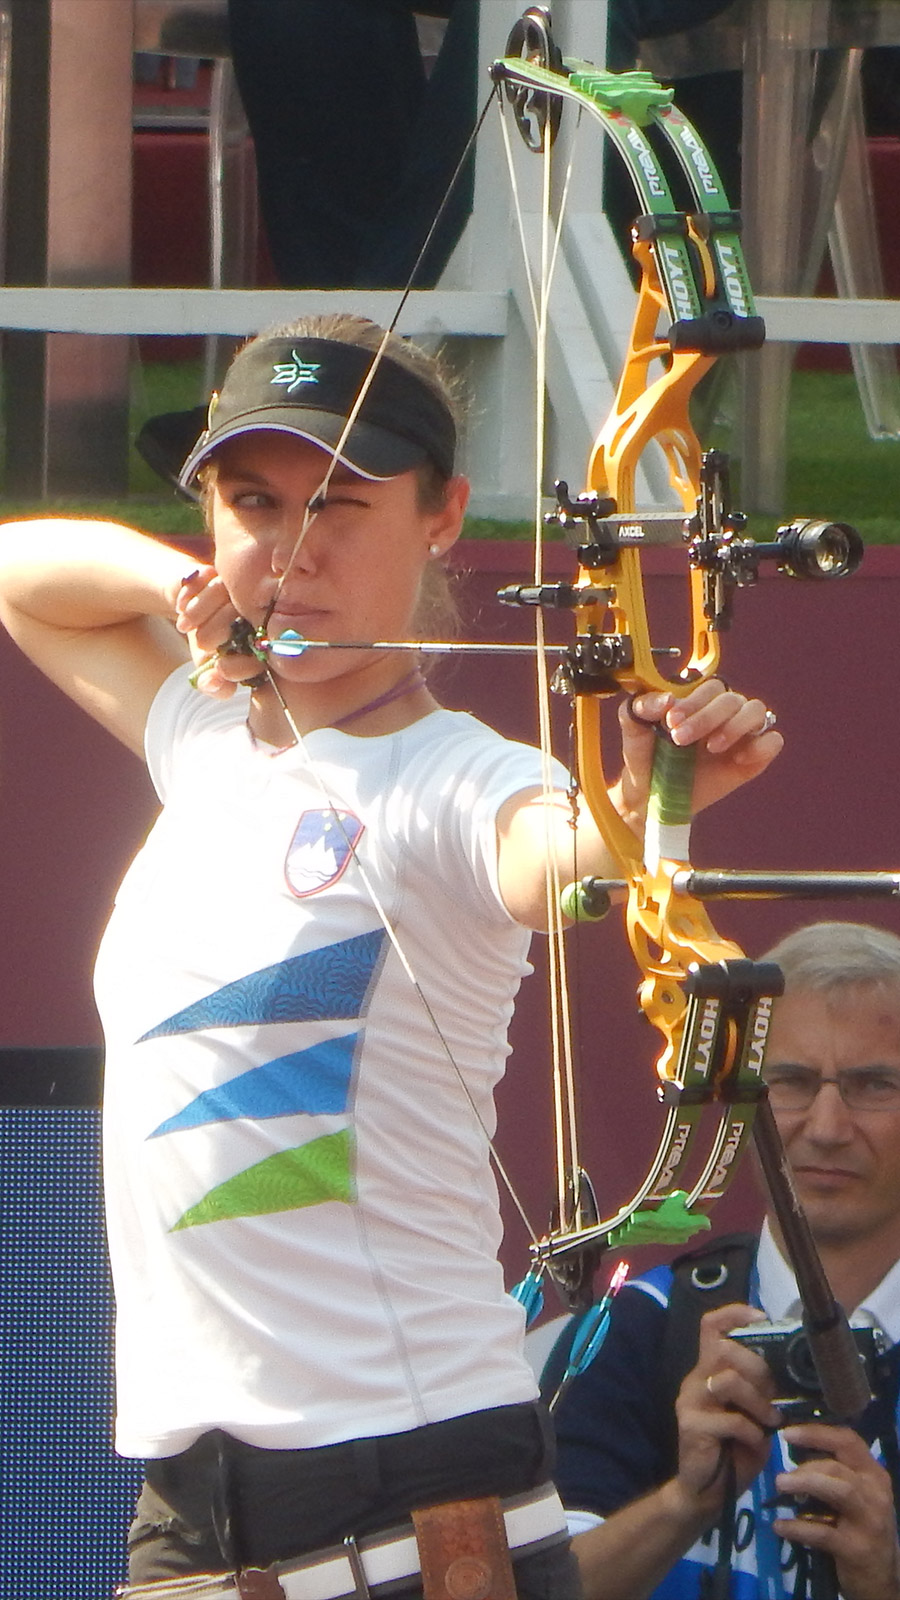 2019 Archery World Cup Final in Moscow. Women's compound. Author: Oleg Bkhambri (Voltmetro) - cutted